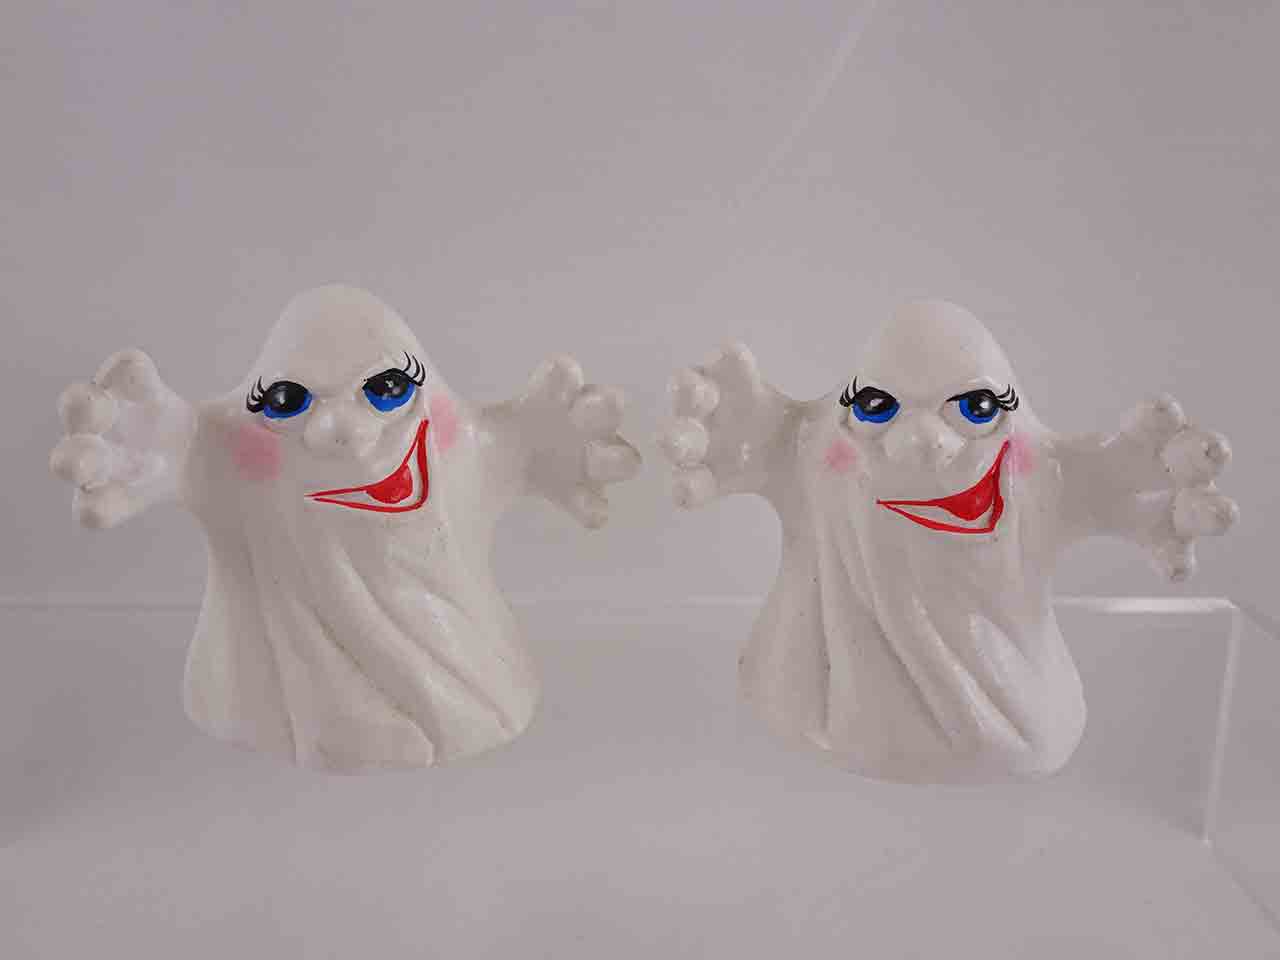 Halloween characters salt and pepper shakers possibly made by Jean Grief - Ghosts